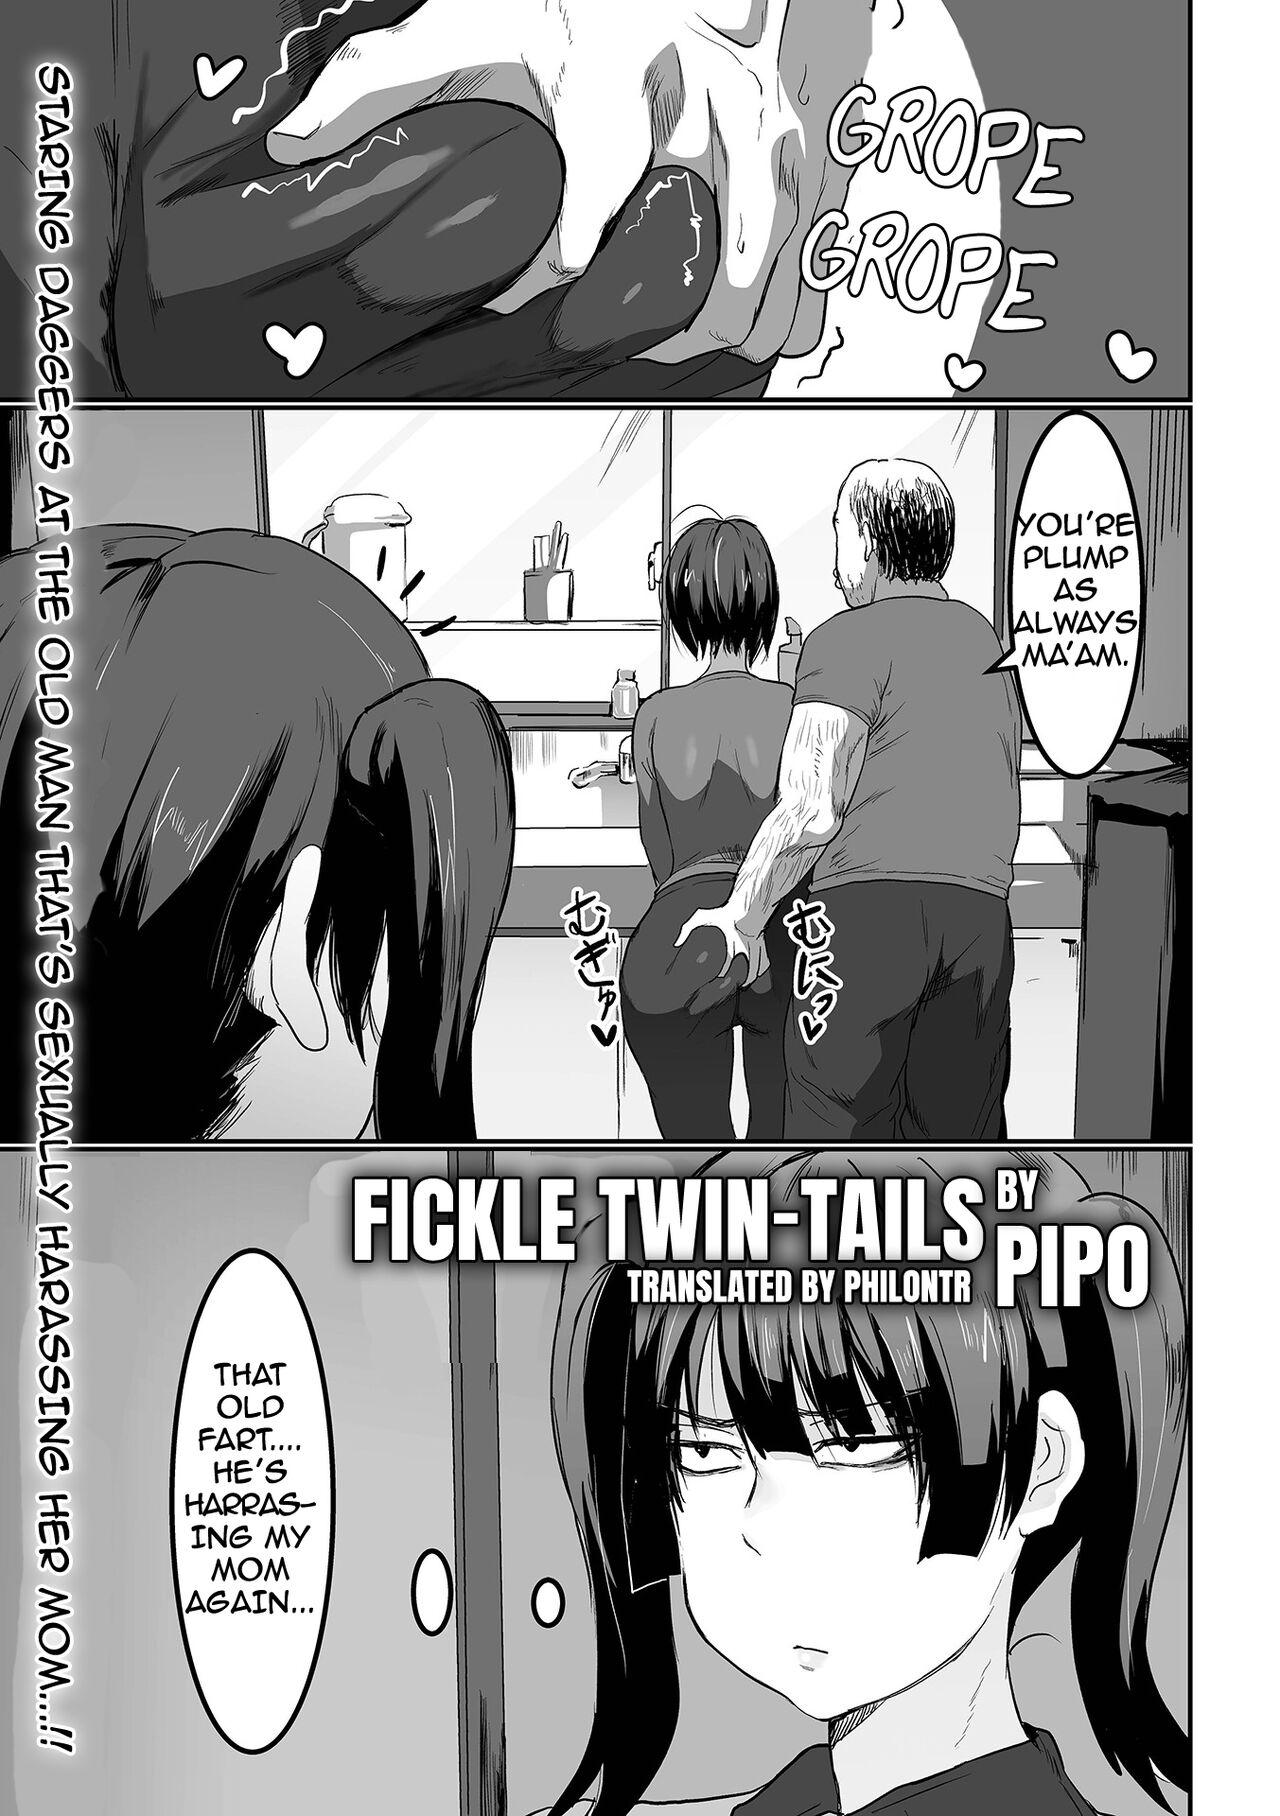 Fickle Twin-tails 0